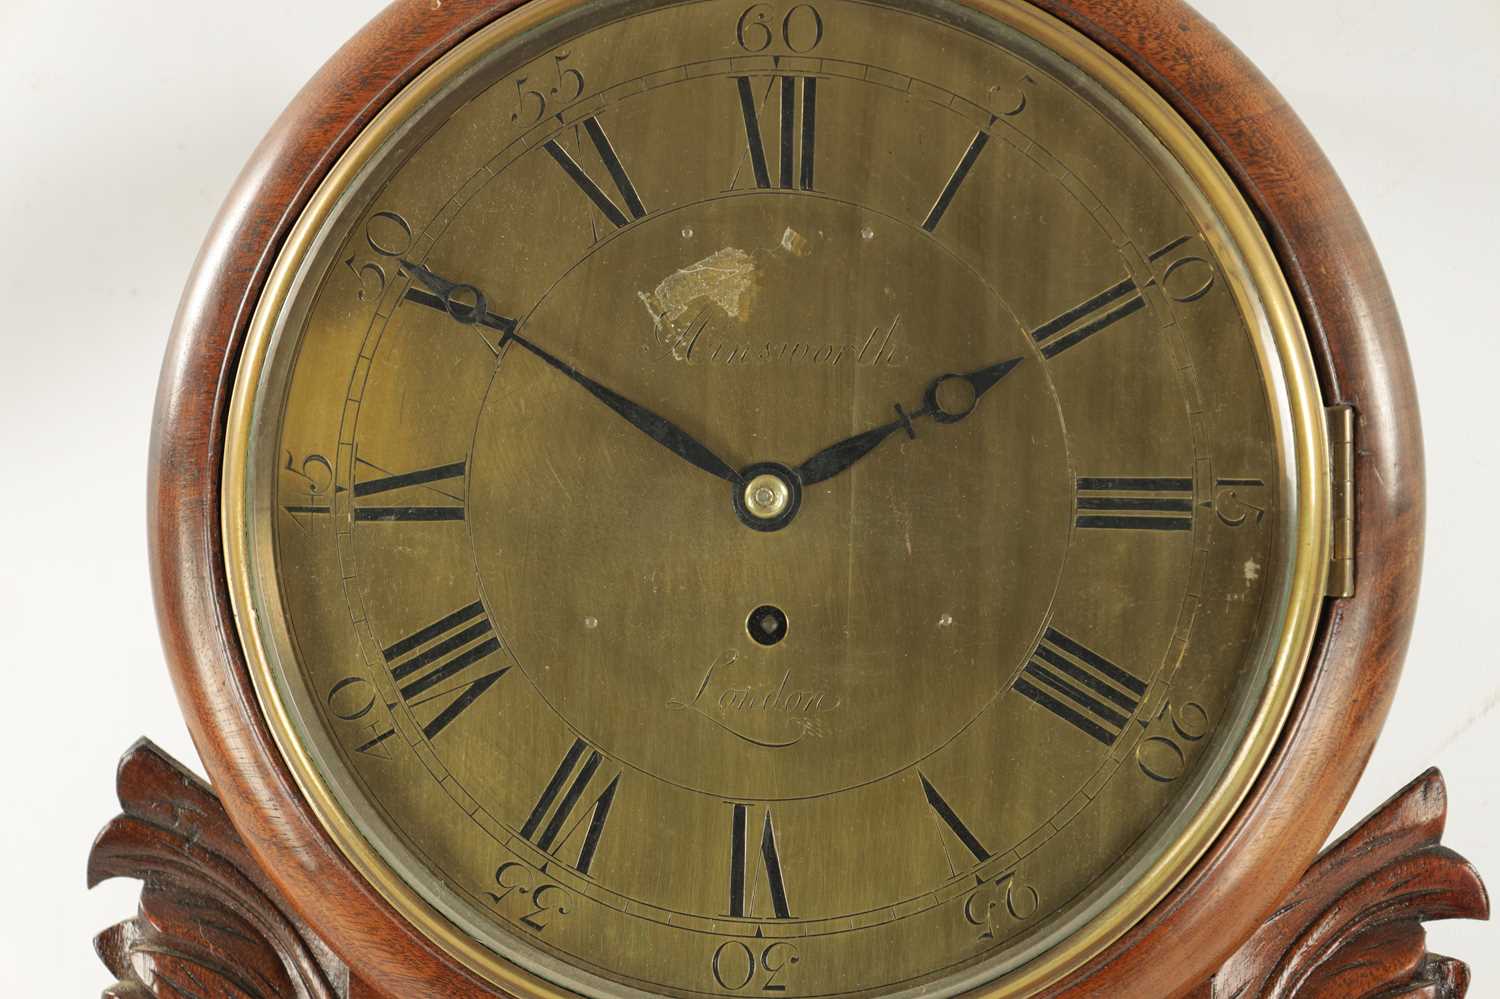 AINSWORTH, LONDON. A LATE REGENCY MAHOGANY BRASS DIAL EIGHT-DAY FUSEE WALL CLOCK - Image 2 of 6